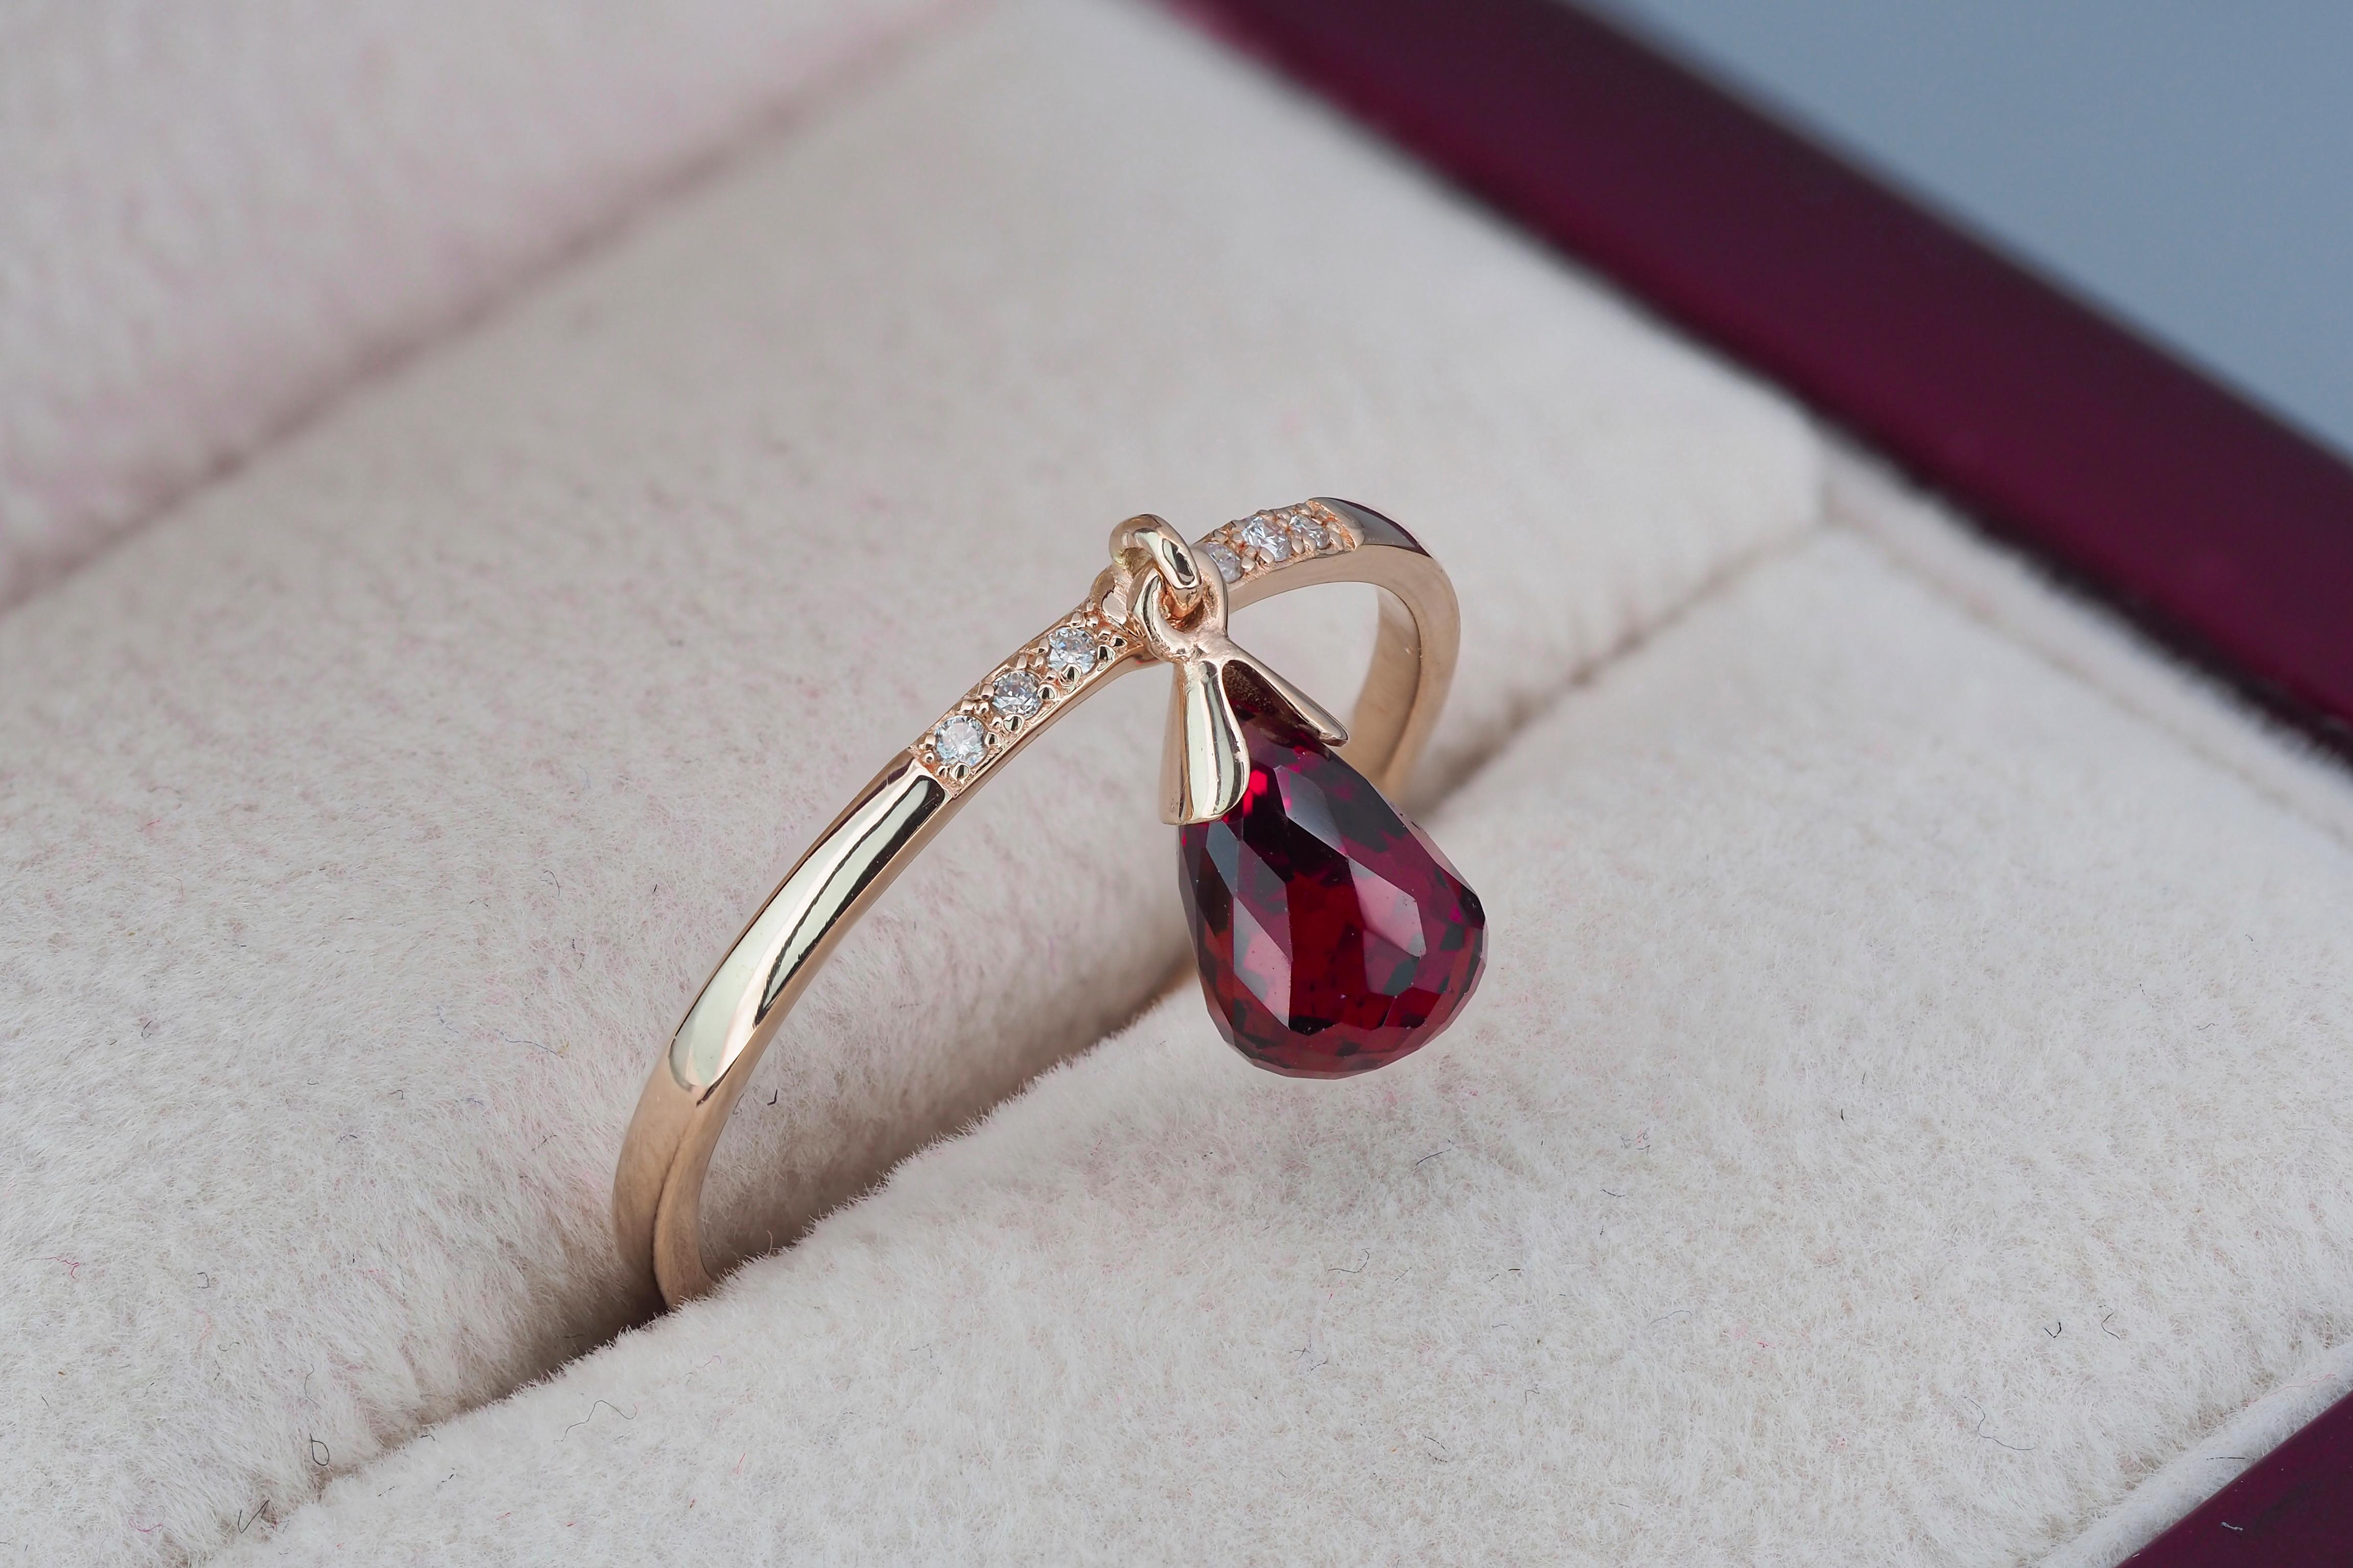 For Sale:  14k Gold Ring with Briolette Cut Garnet and Diamonds 7